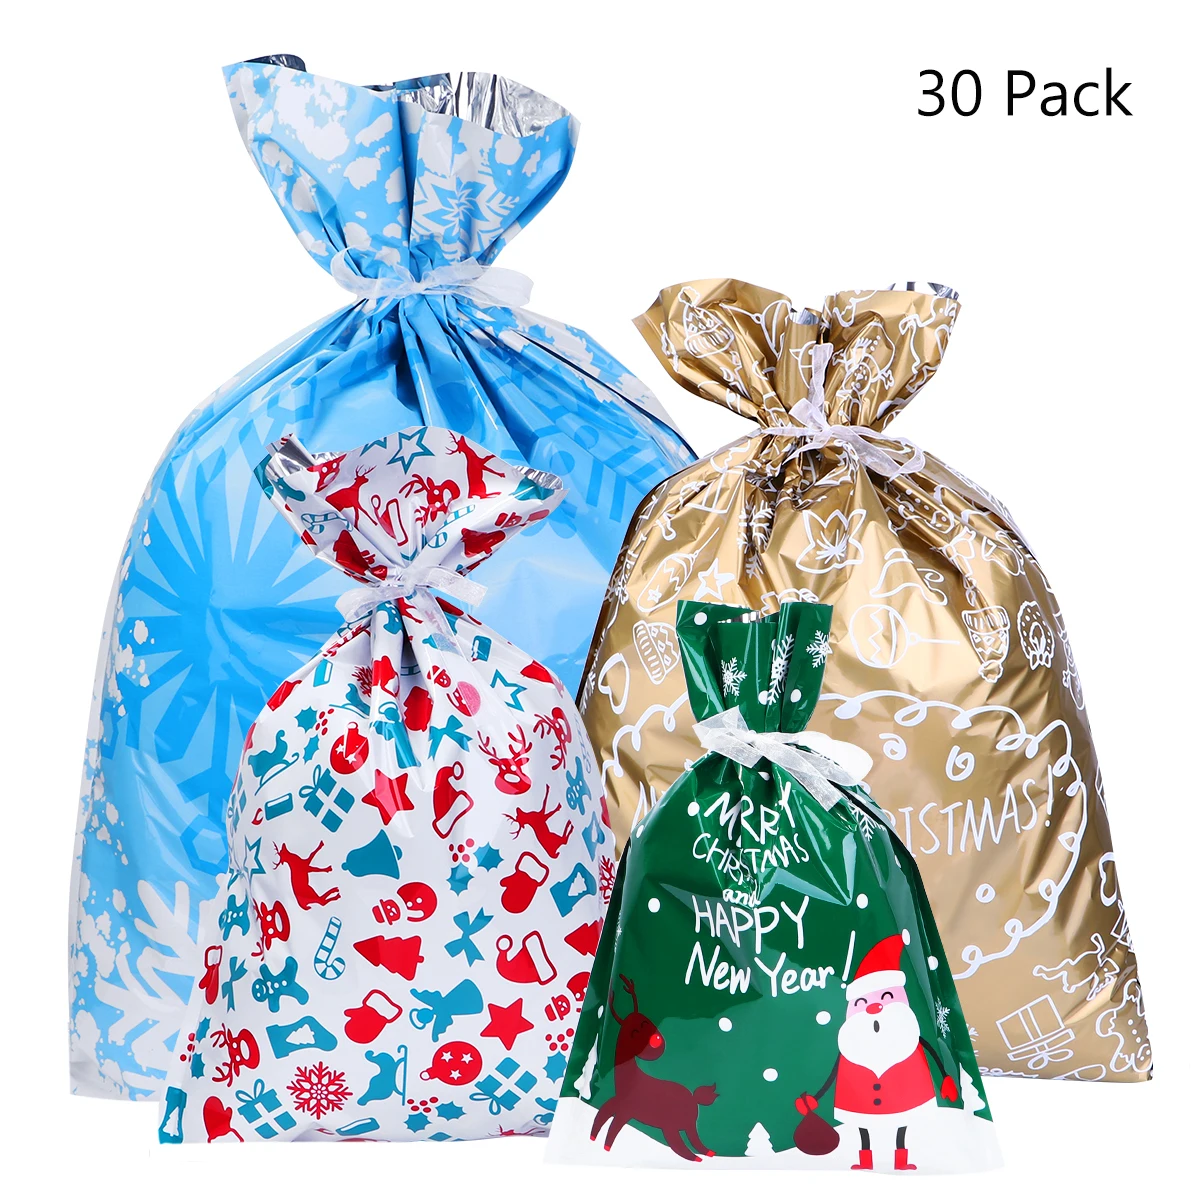 

Cabilock 30PCS Christmas Gift Bags Assorted Styles Christmas Gift Wrapping Goodie Bags Favor Pouches for Xmas Party Wedding A50